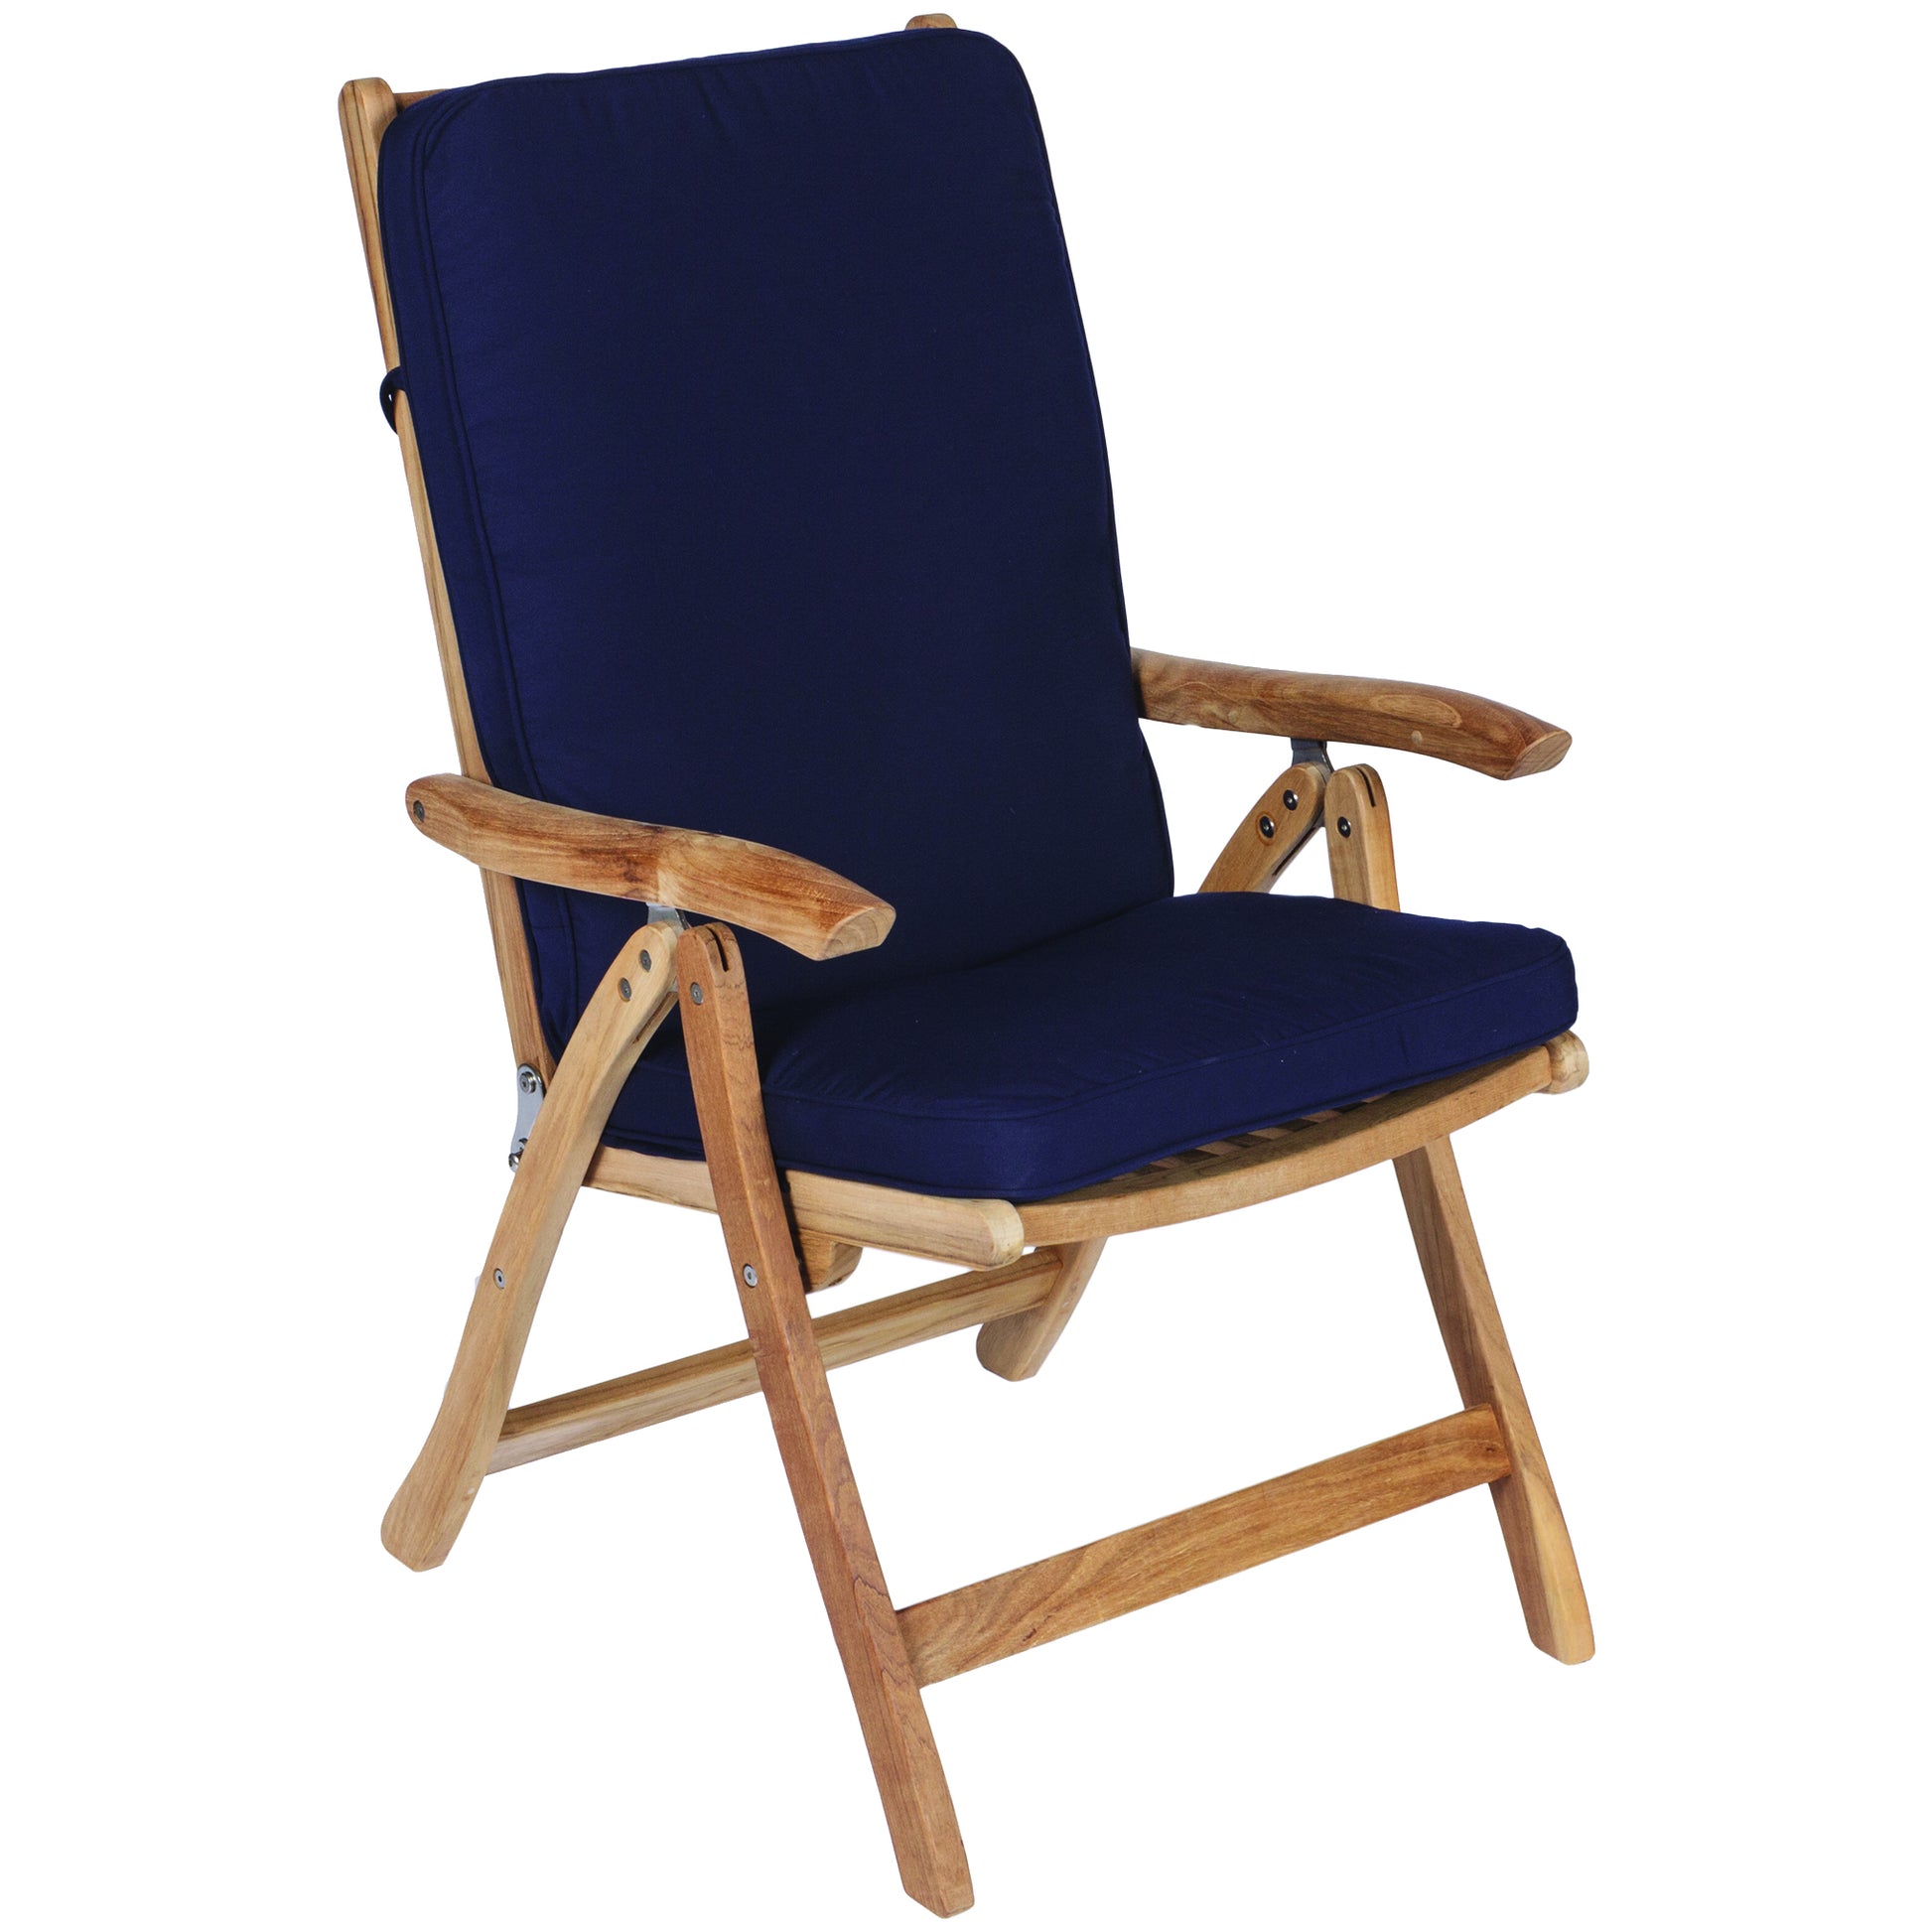 Estate Fullback Chair Cushion by Royal Teak Collection